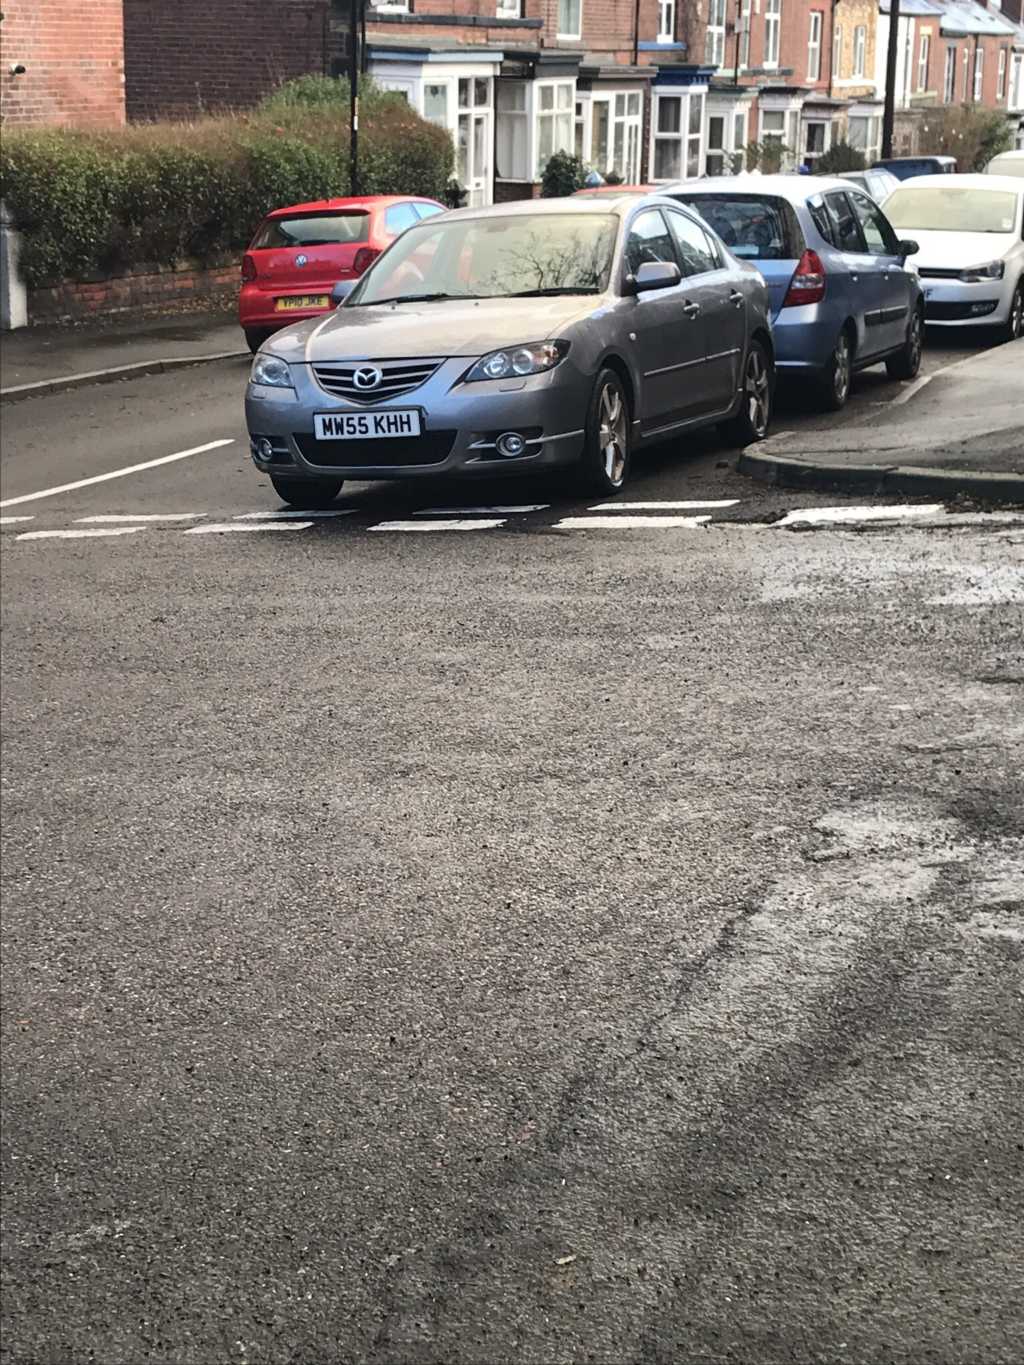 MW55 KHH is a Selfish Parker